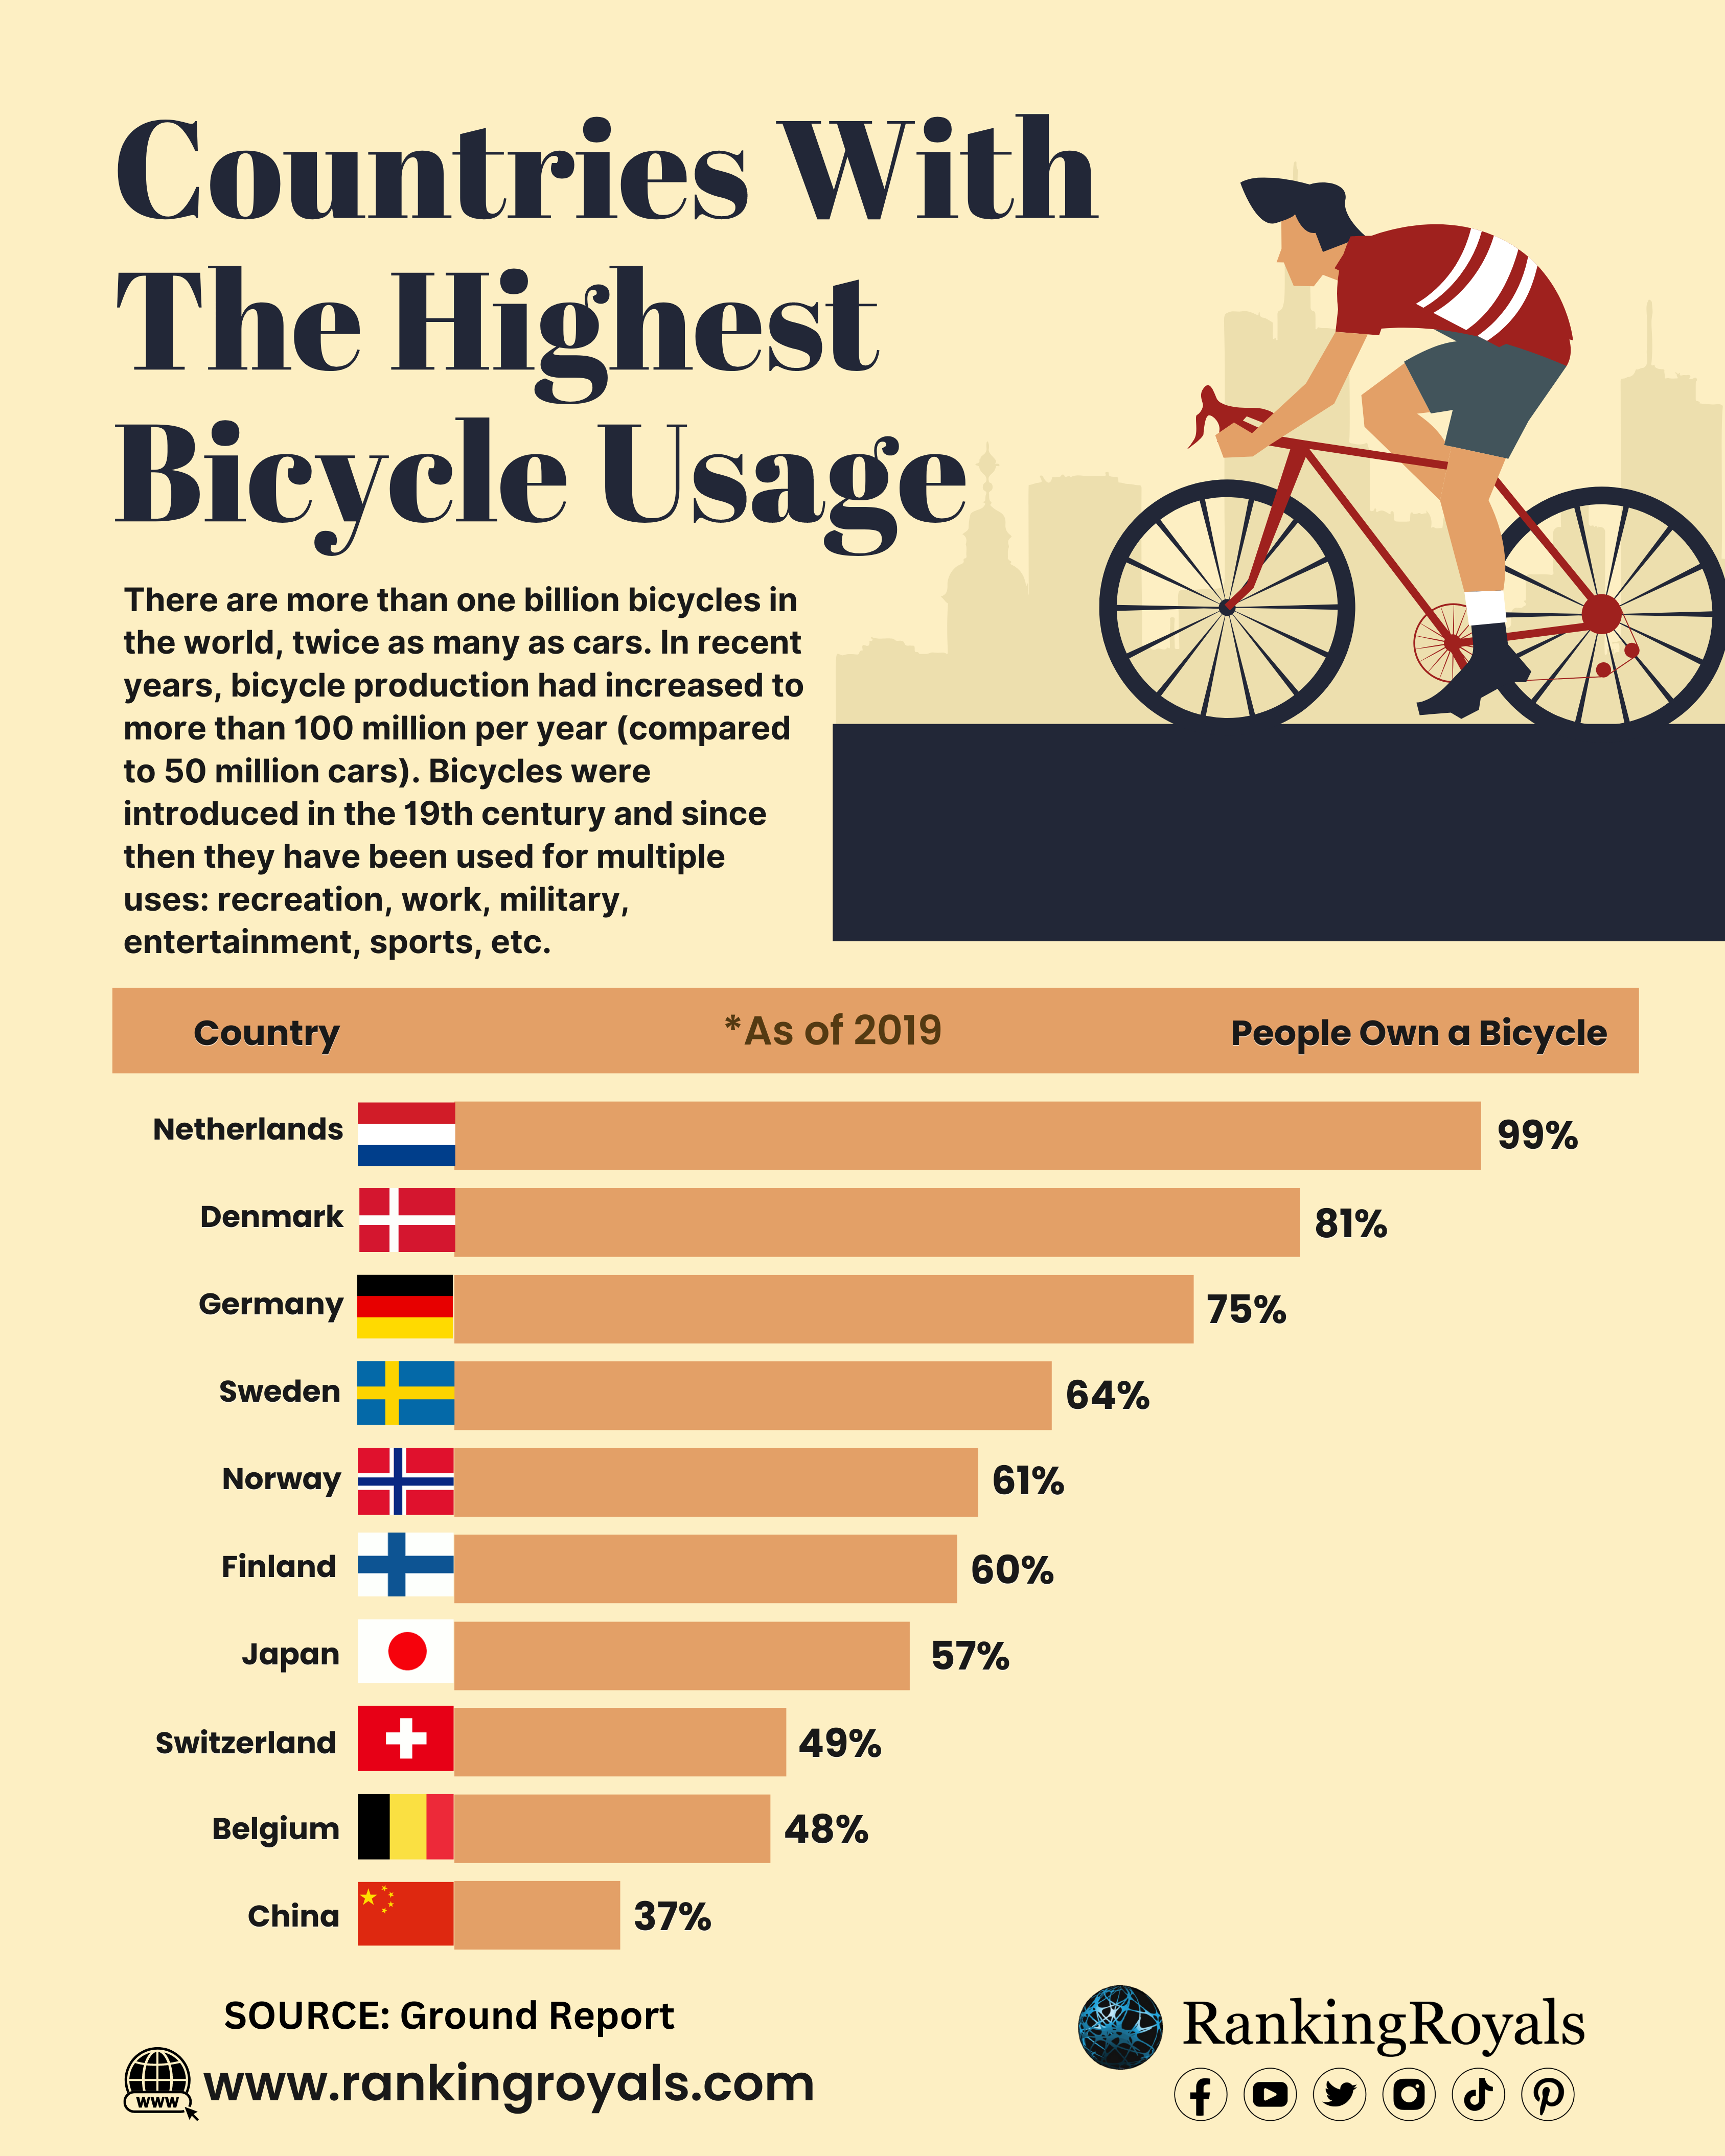 Countries with the Highest Bicycle Usage